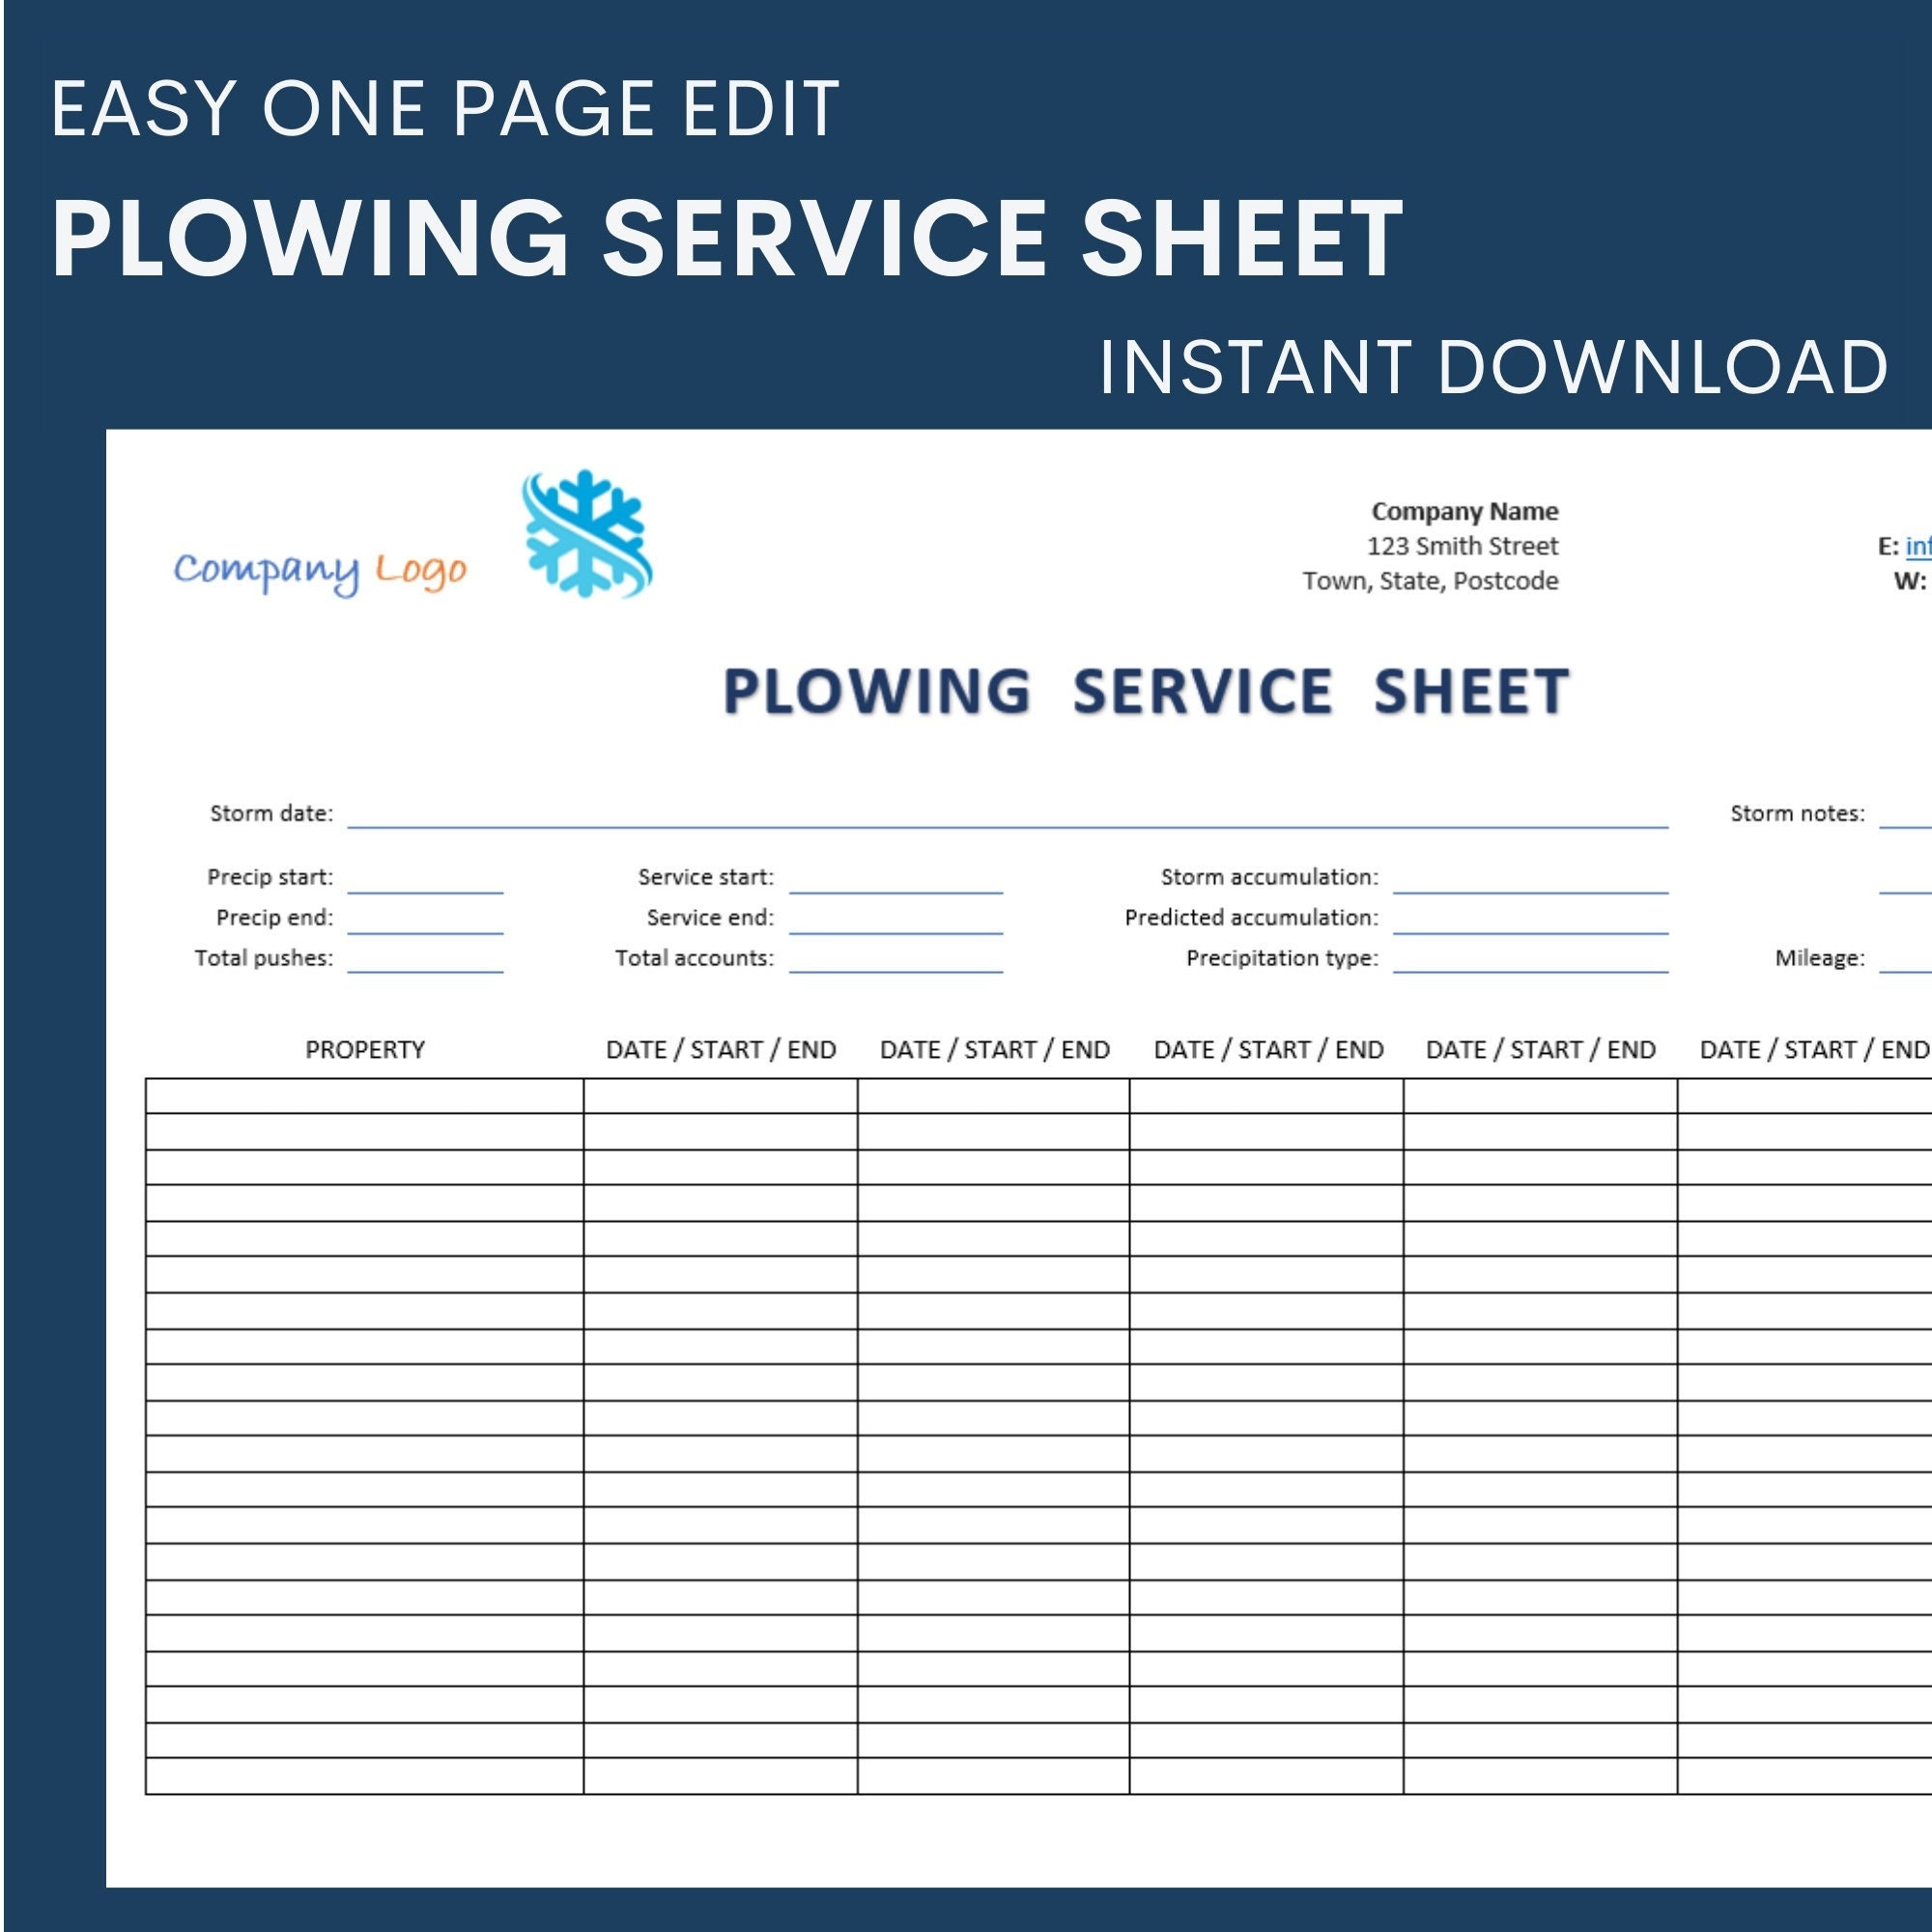 Snow Removal Agreement Template Plowing Service Sheet Simple Easy ...